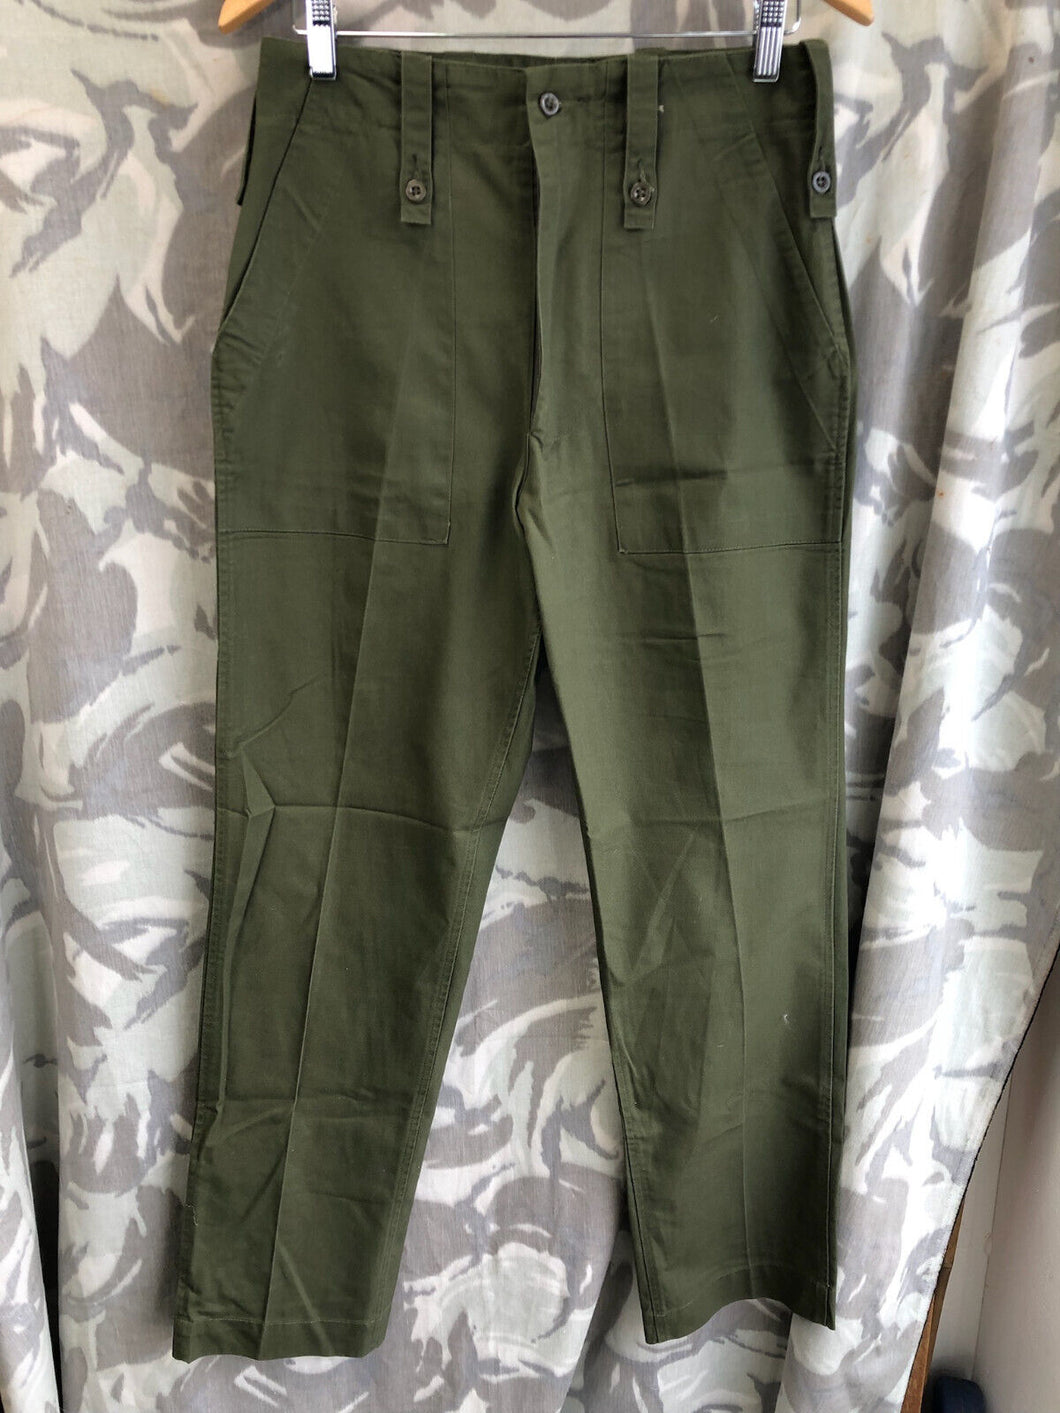 Genuine British Army Olive Green Lightweight Fatigue Combat Trousers - 75/80/96